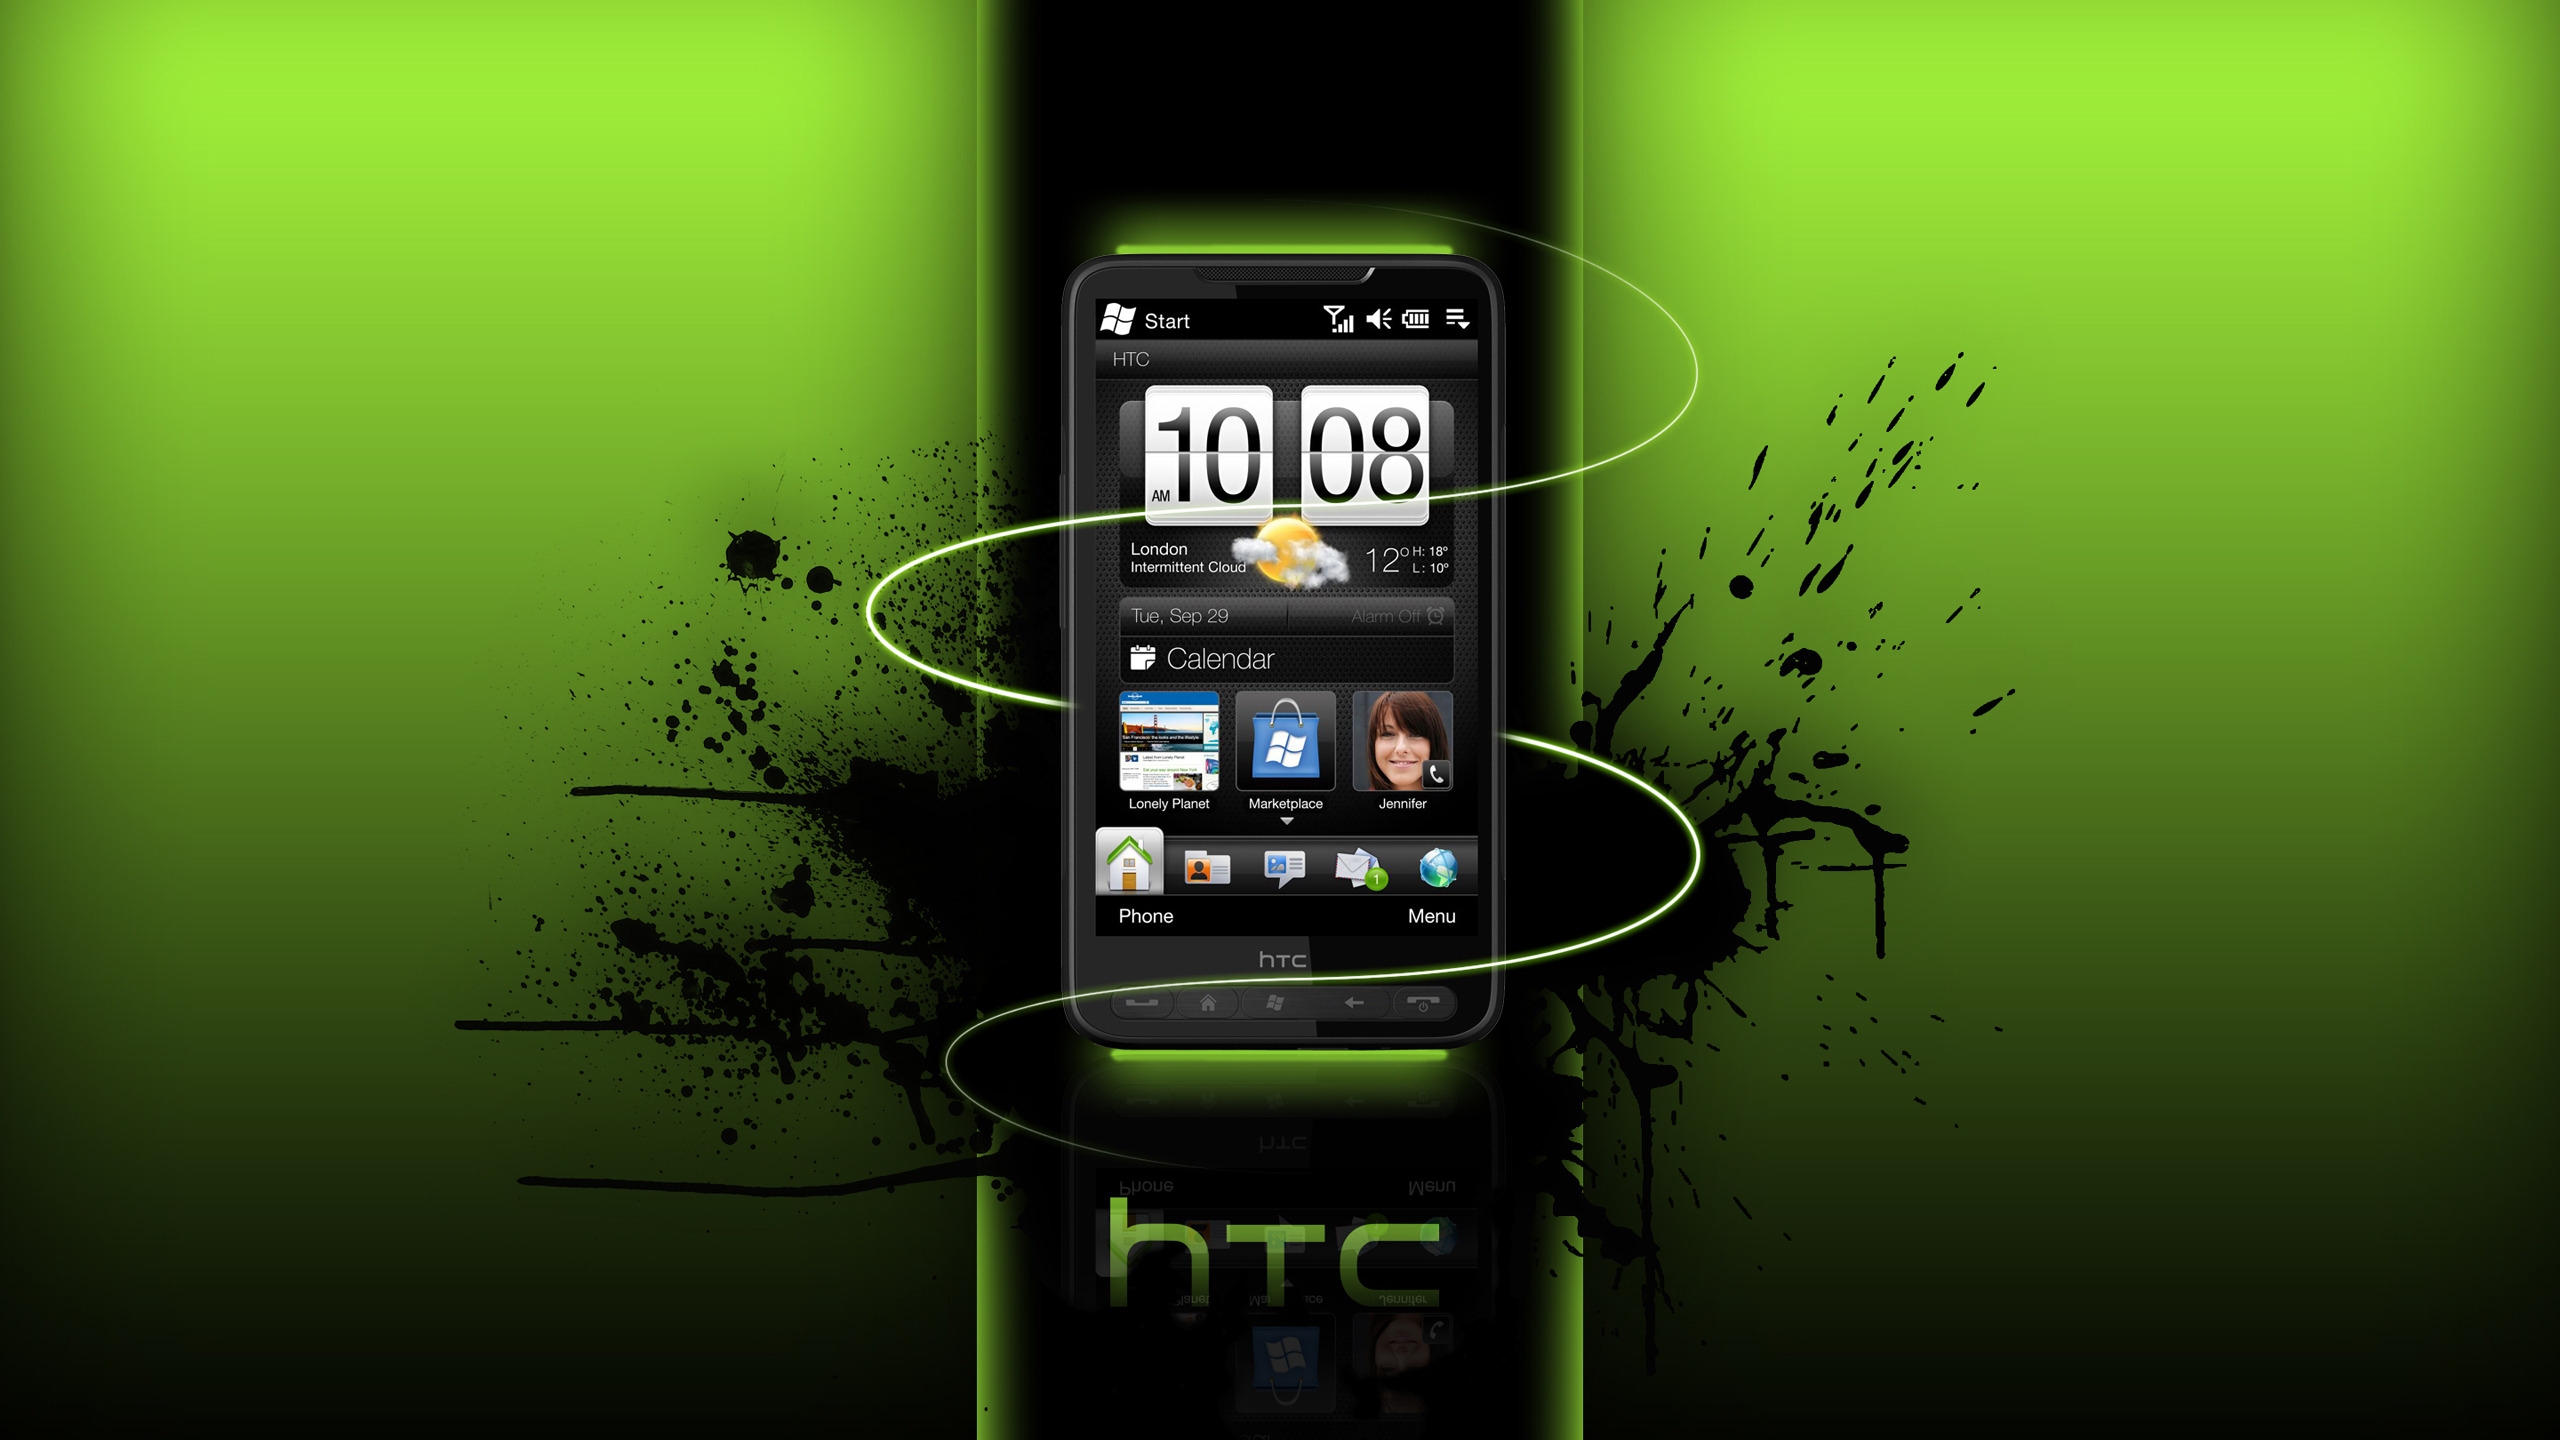 HTC Smartphone for 2560x1440 HDTV resolution